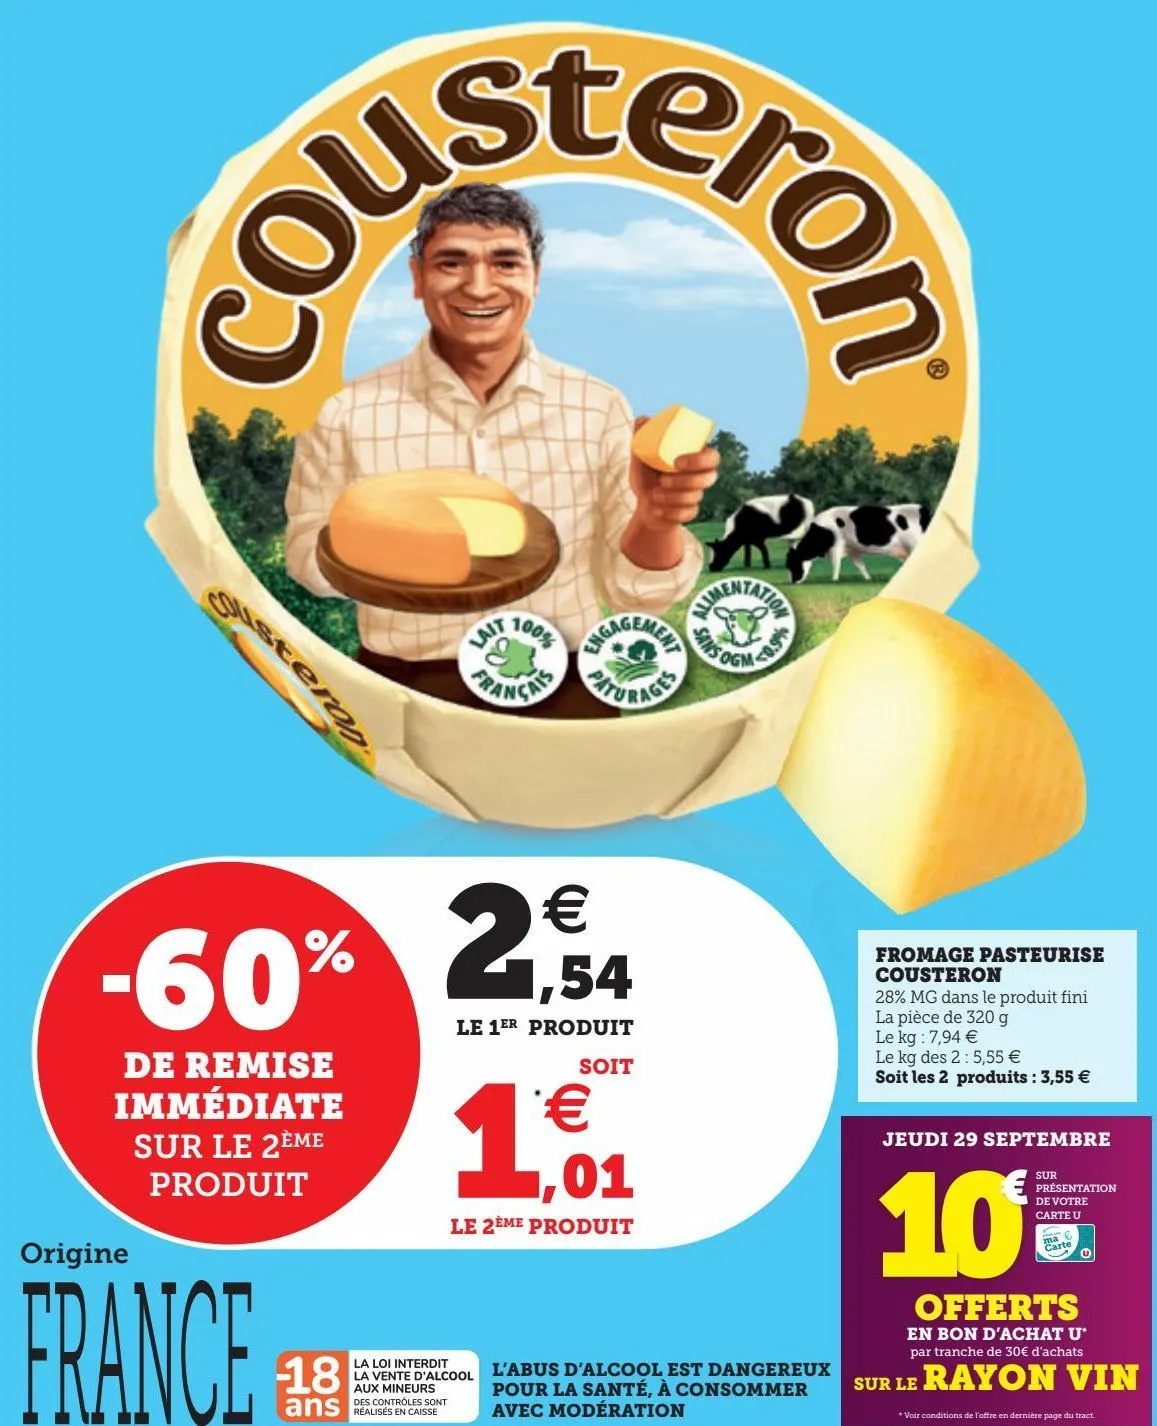 fromage pasteurise cousteron